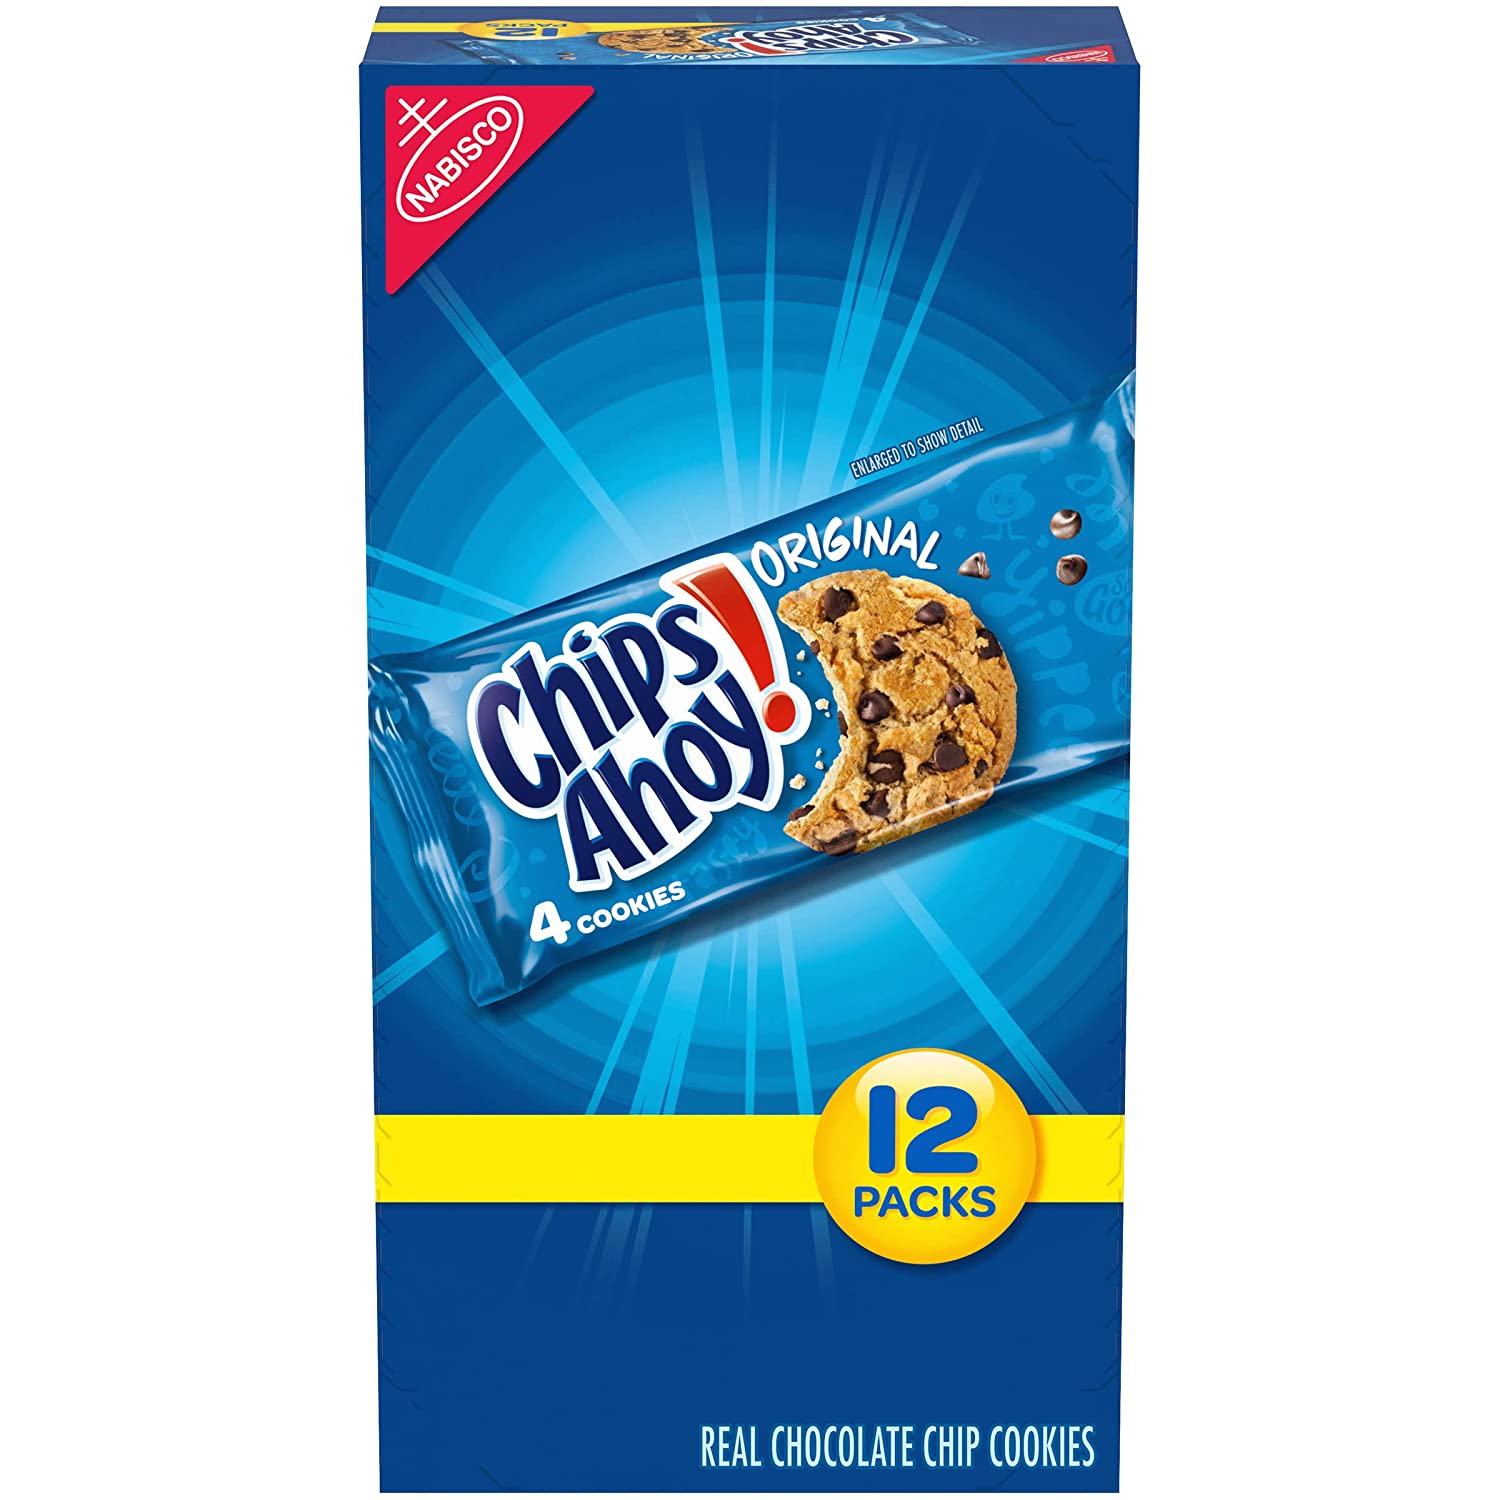 Chips Ahoy! Cookies, Chocolate Chip, 12 ct